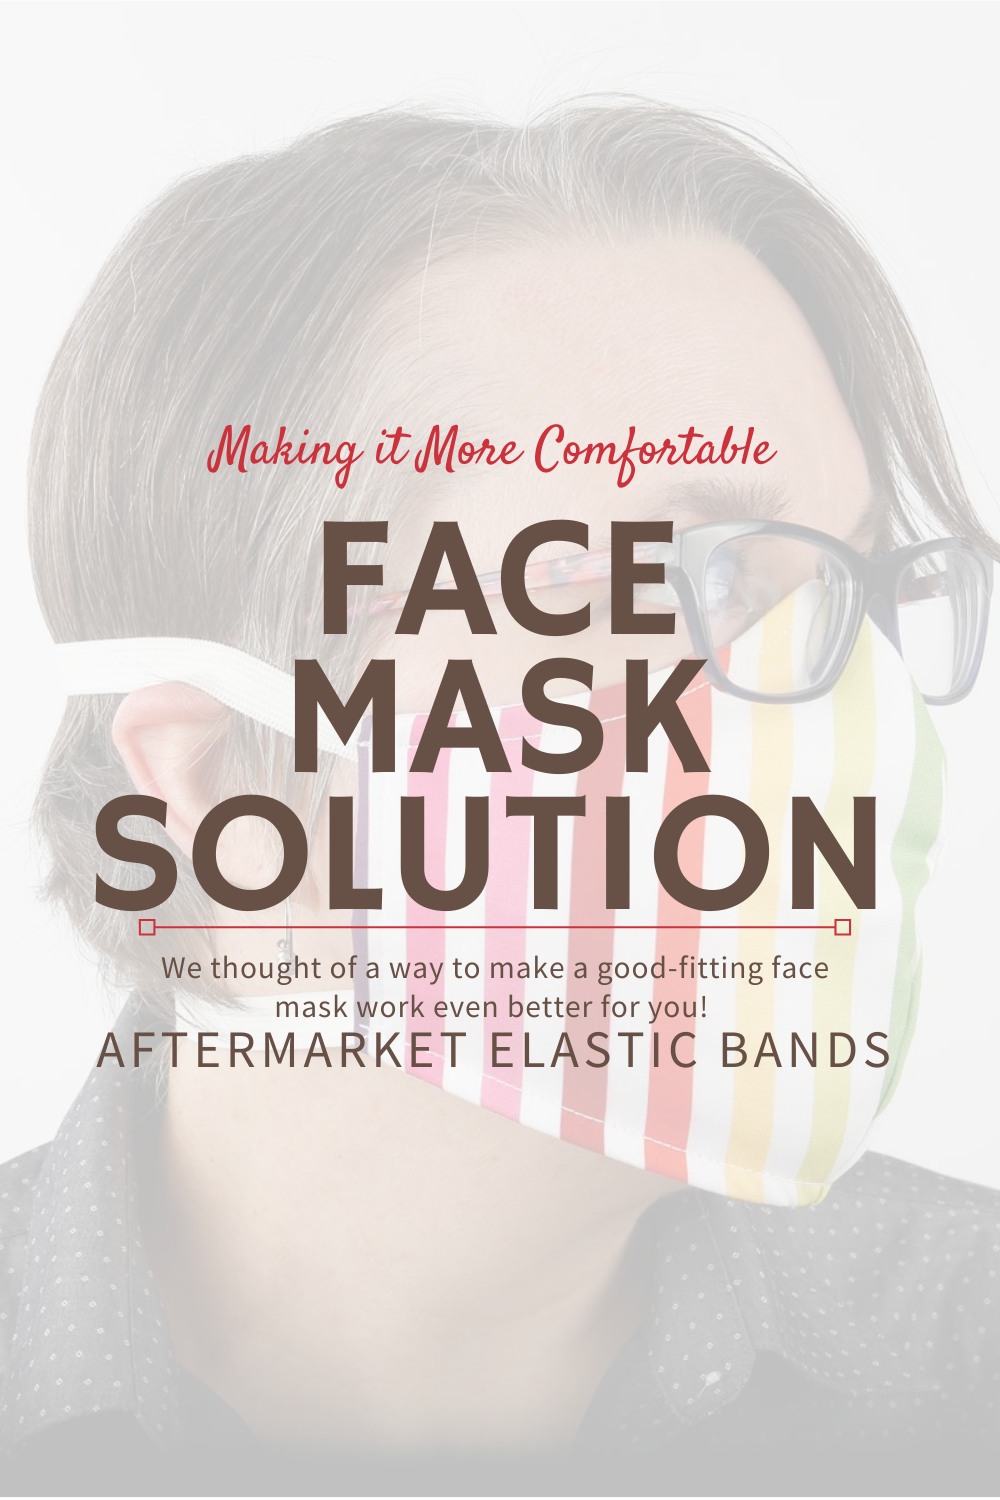 We have an aftermarket solution to make our face masks more comfortable to wear, especially if you use glasses or hearing aids. 